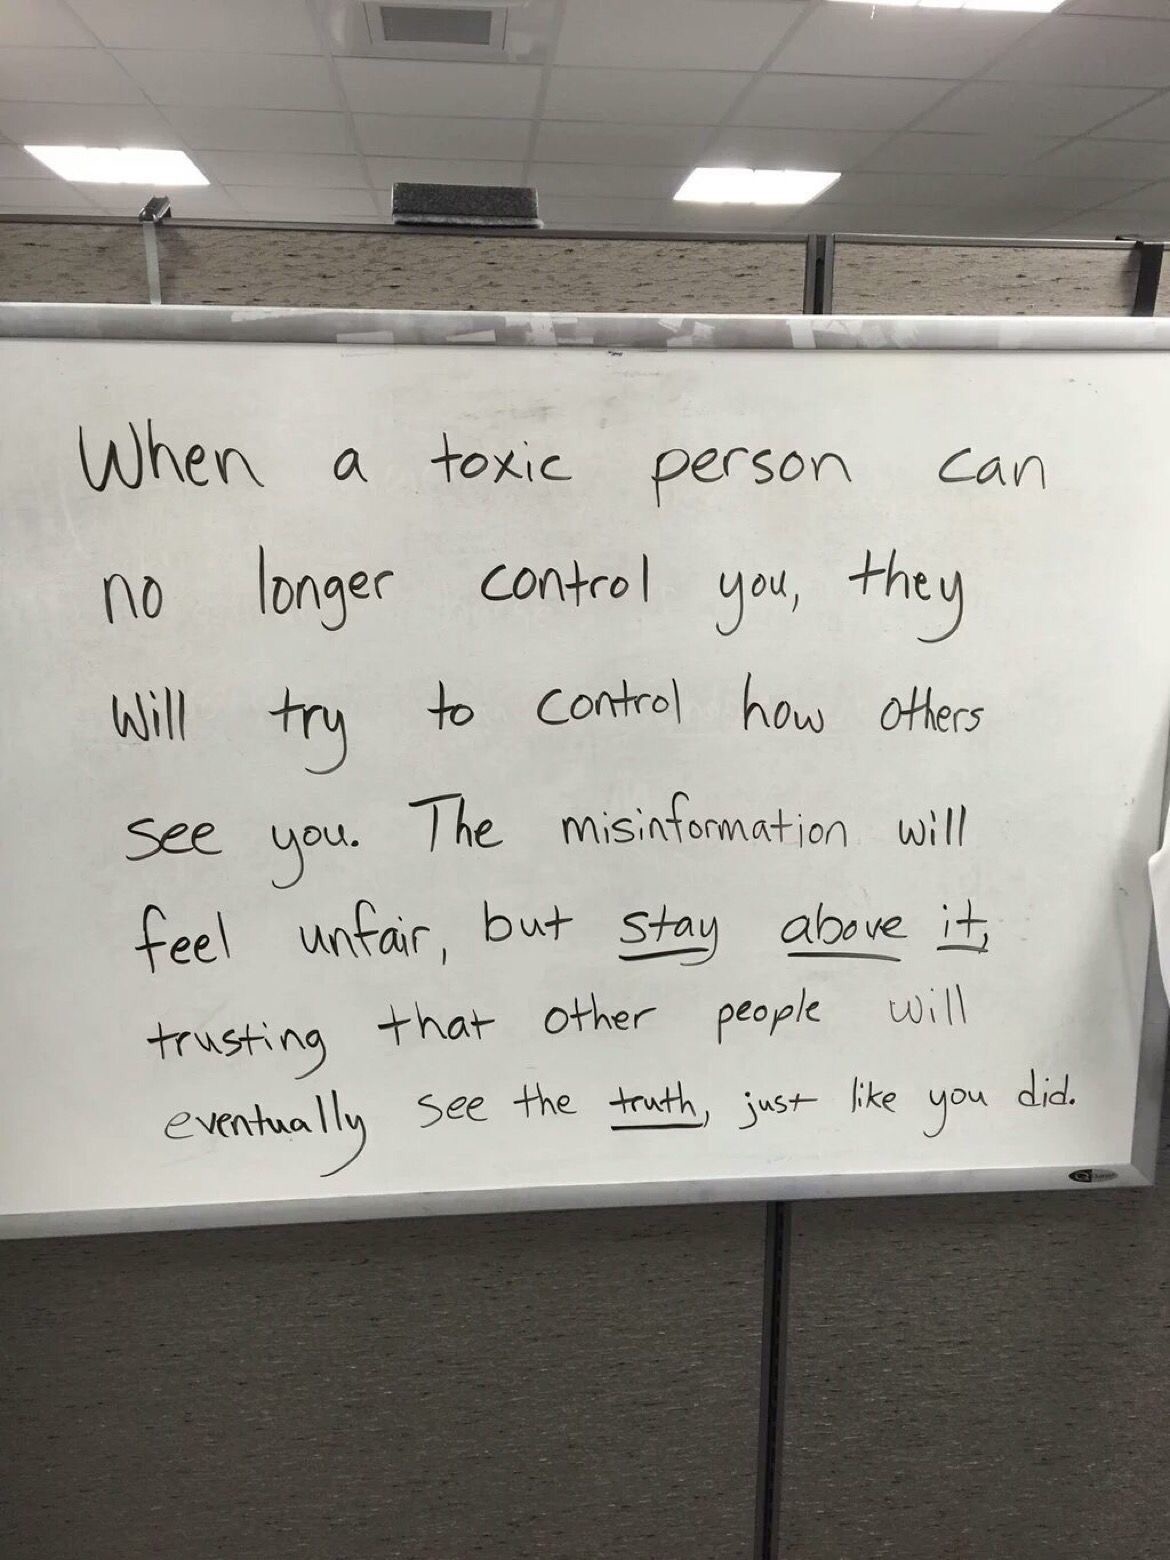 toxic person can no longer control you - When a toxic person can no longer control you, they will try to control how others See you. The misinformation will feel unfair, but stay above it, trusting that other people will eventually see the truth, just you